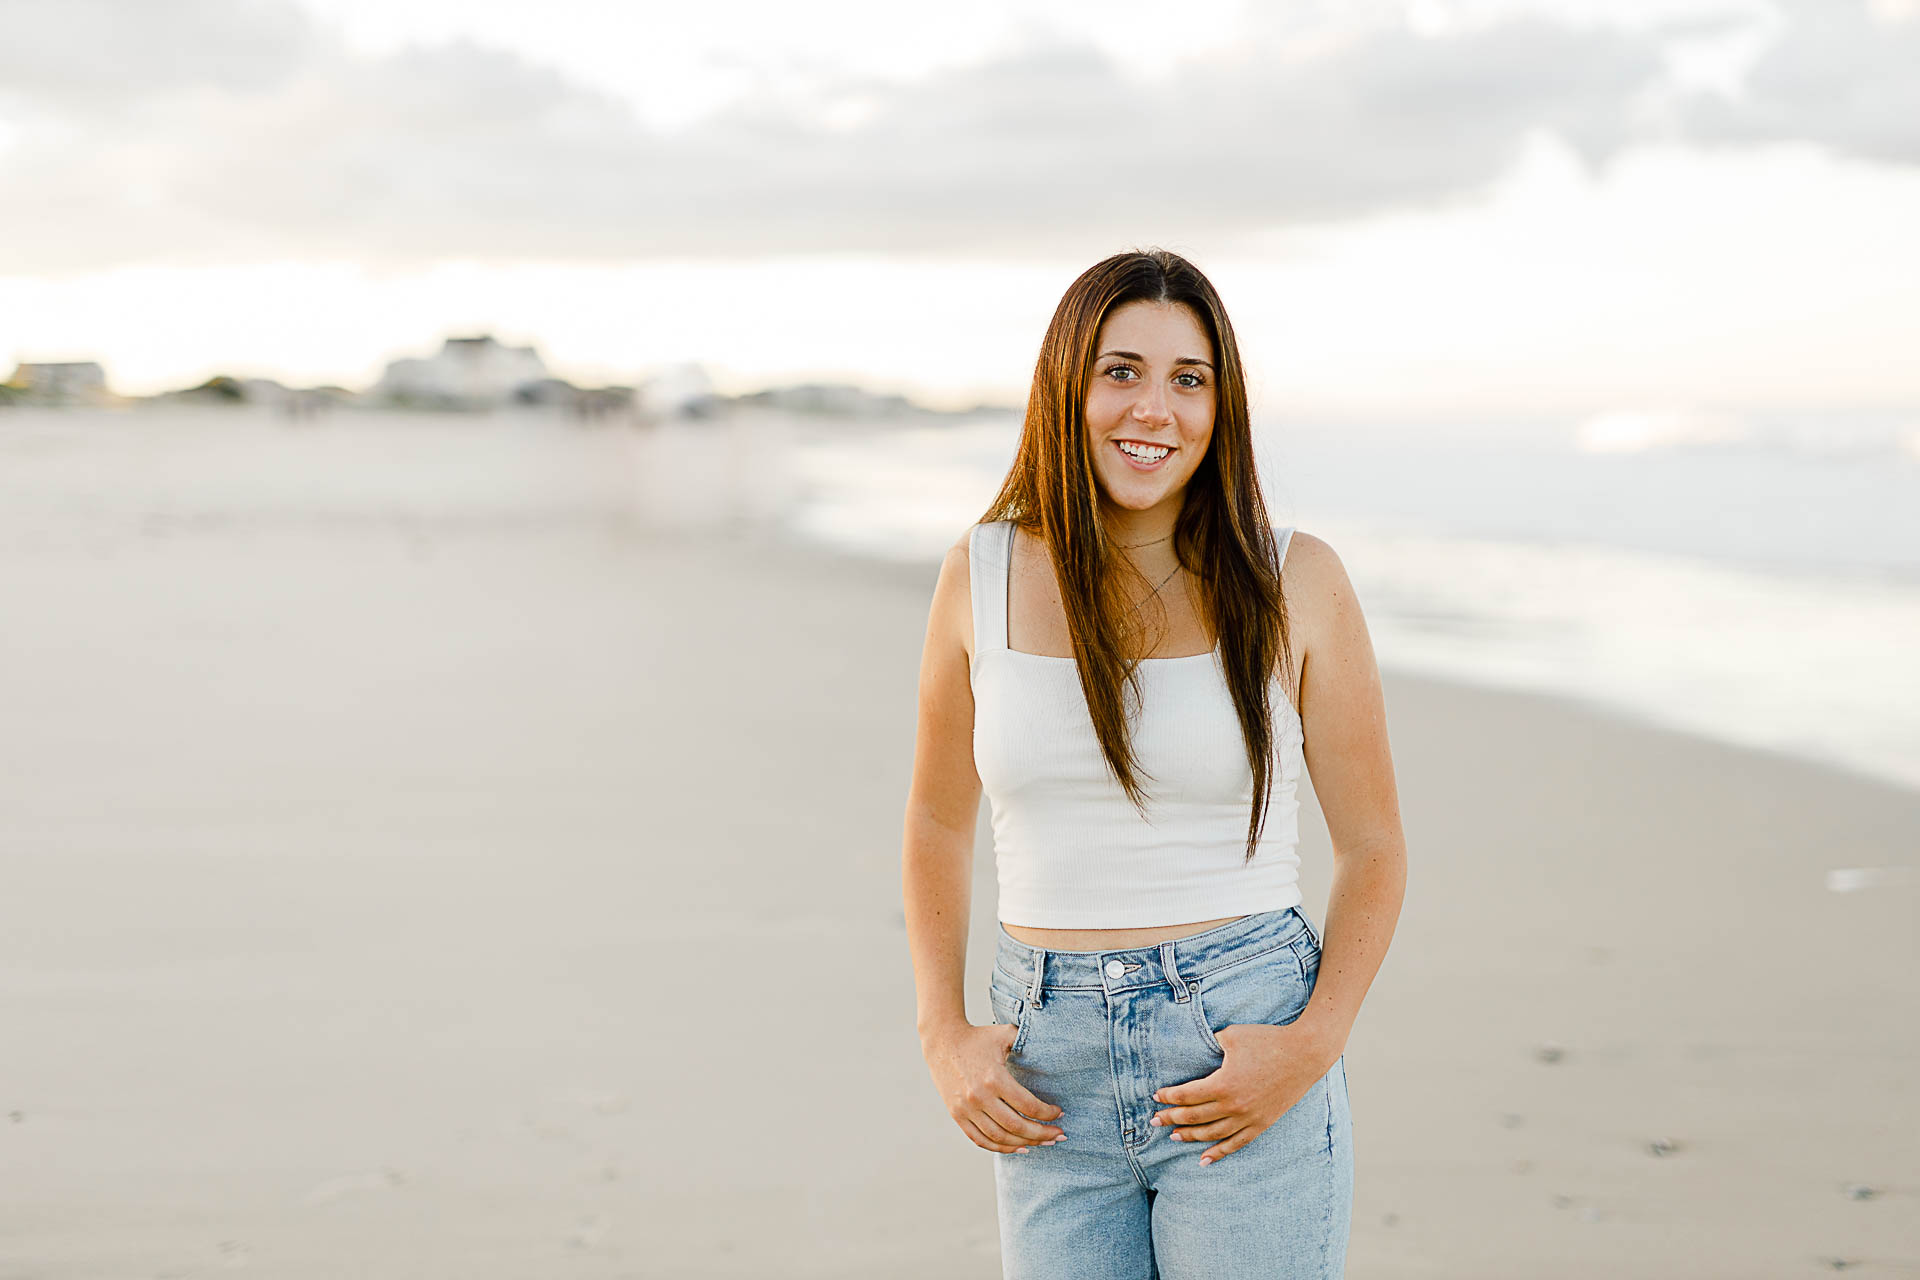 Photo by Norwell Senior Portrait Photographer Christina Runnals | High school girl standing on the beach and smiling